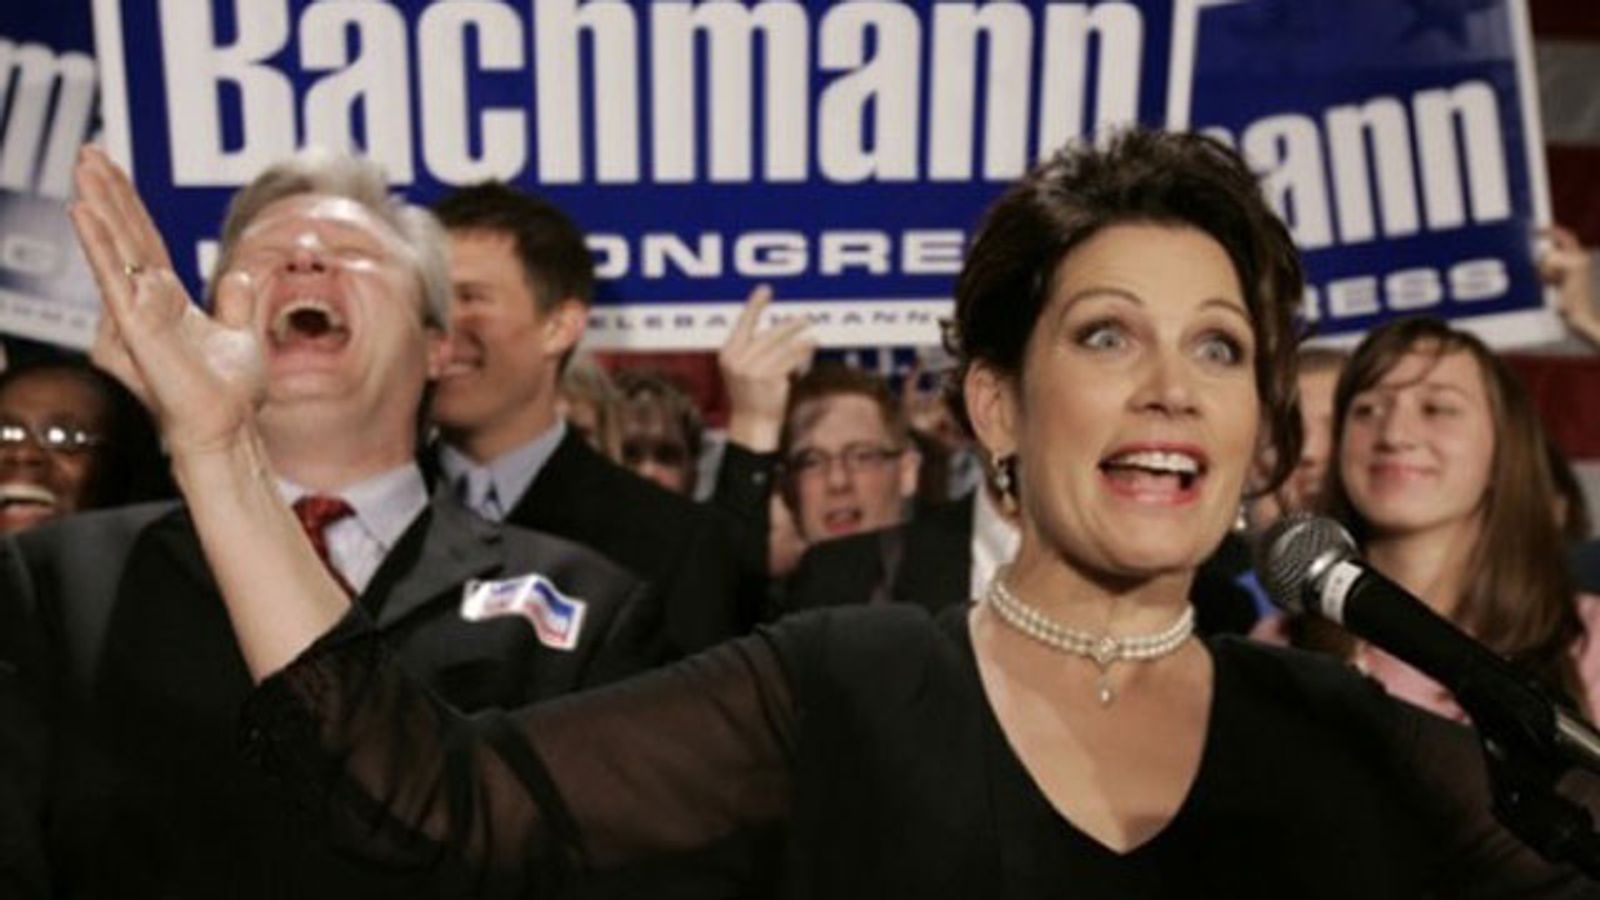 Candidate Bachmann Signs a Declaration of Intolerance *Updated*